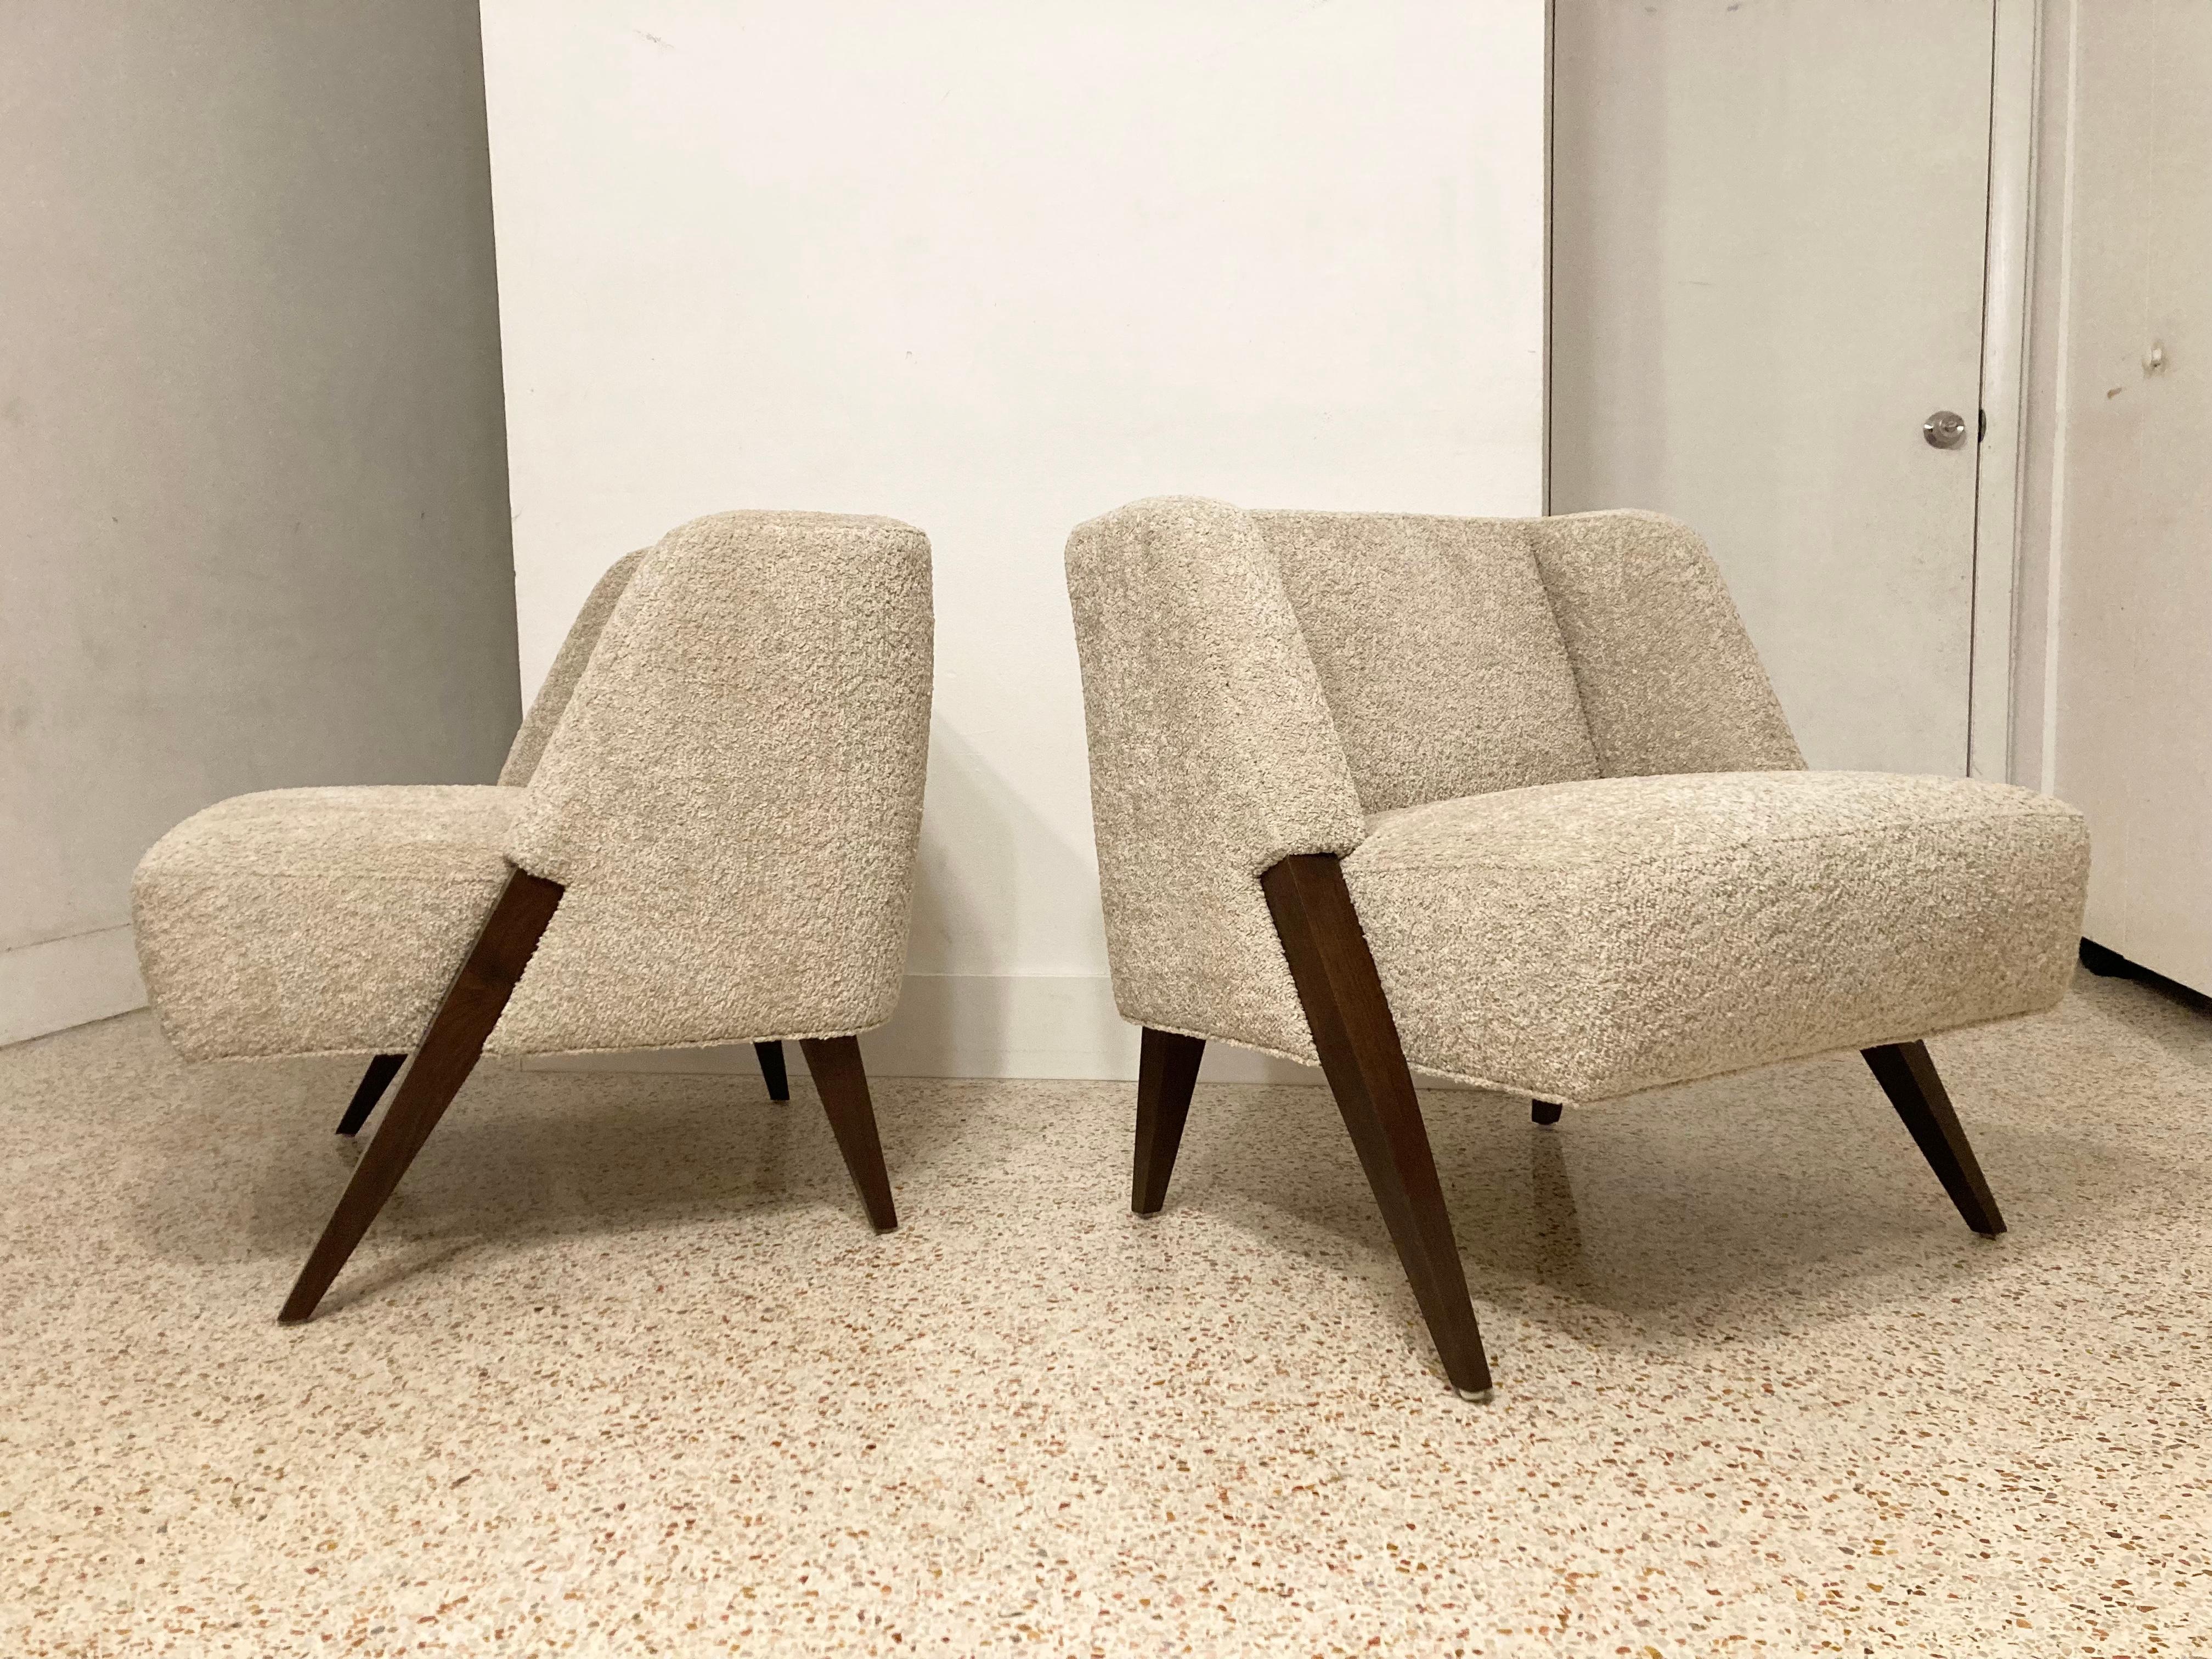 Incredible pair of lounge chairs in the style of Gio Ponti. Solid walnut legs and sand colored bouclé fabric. Ready for a new home.